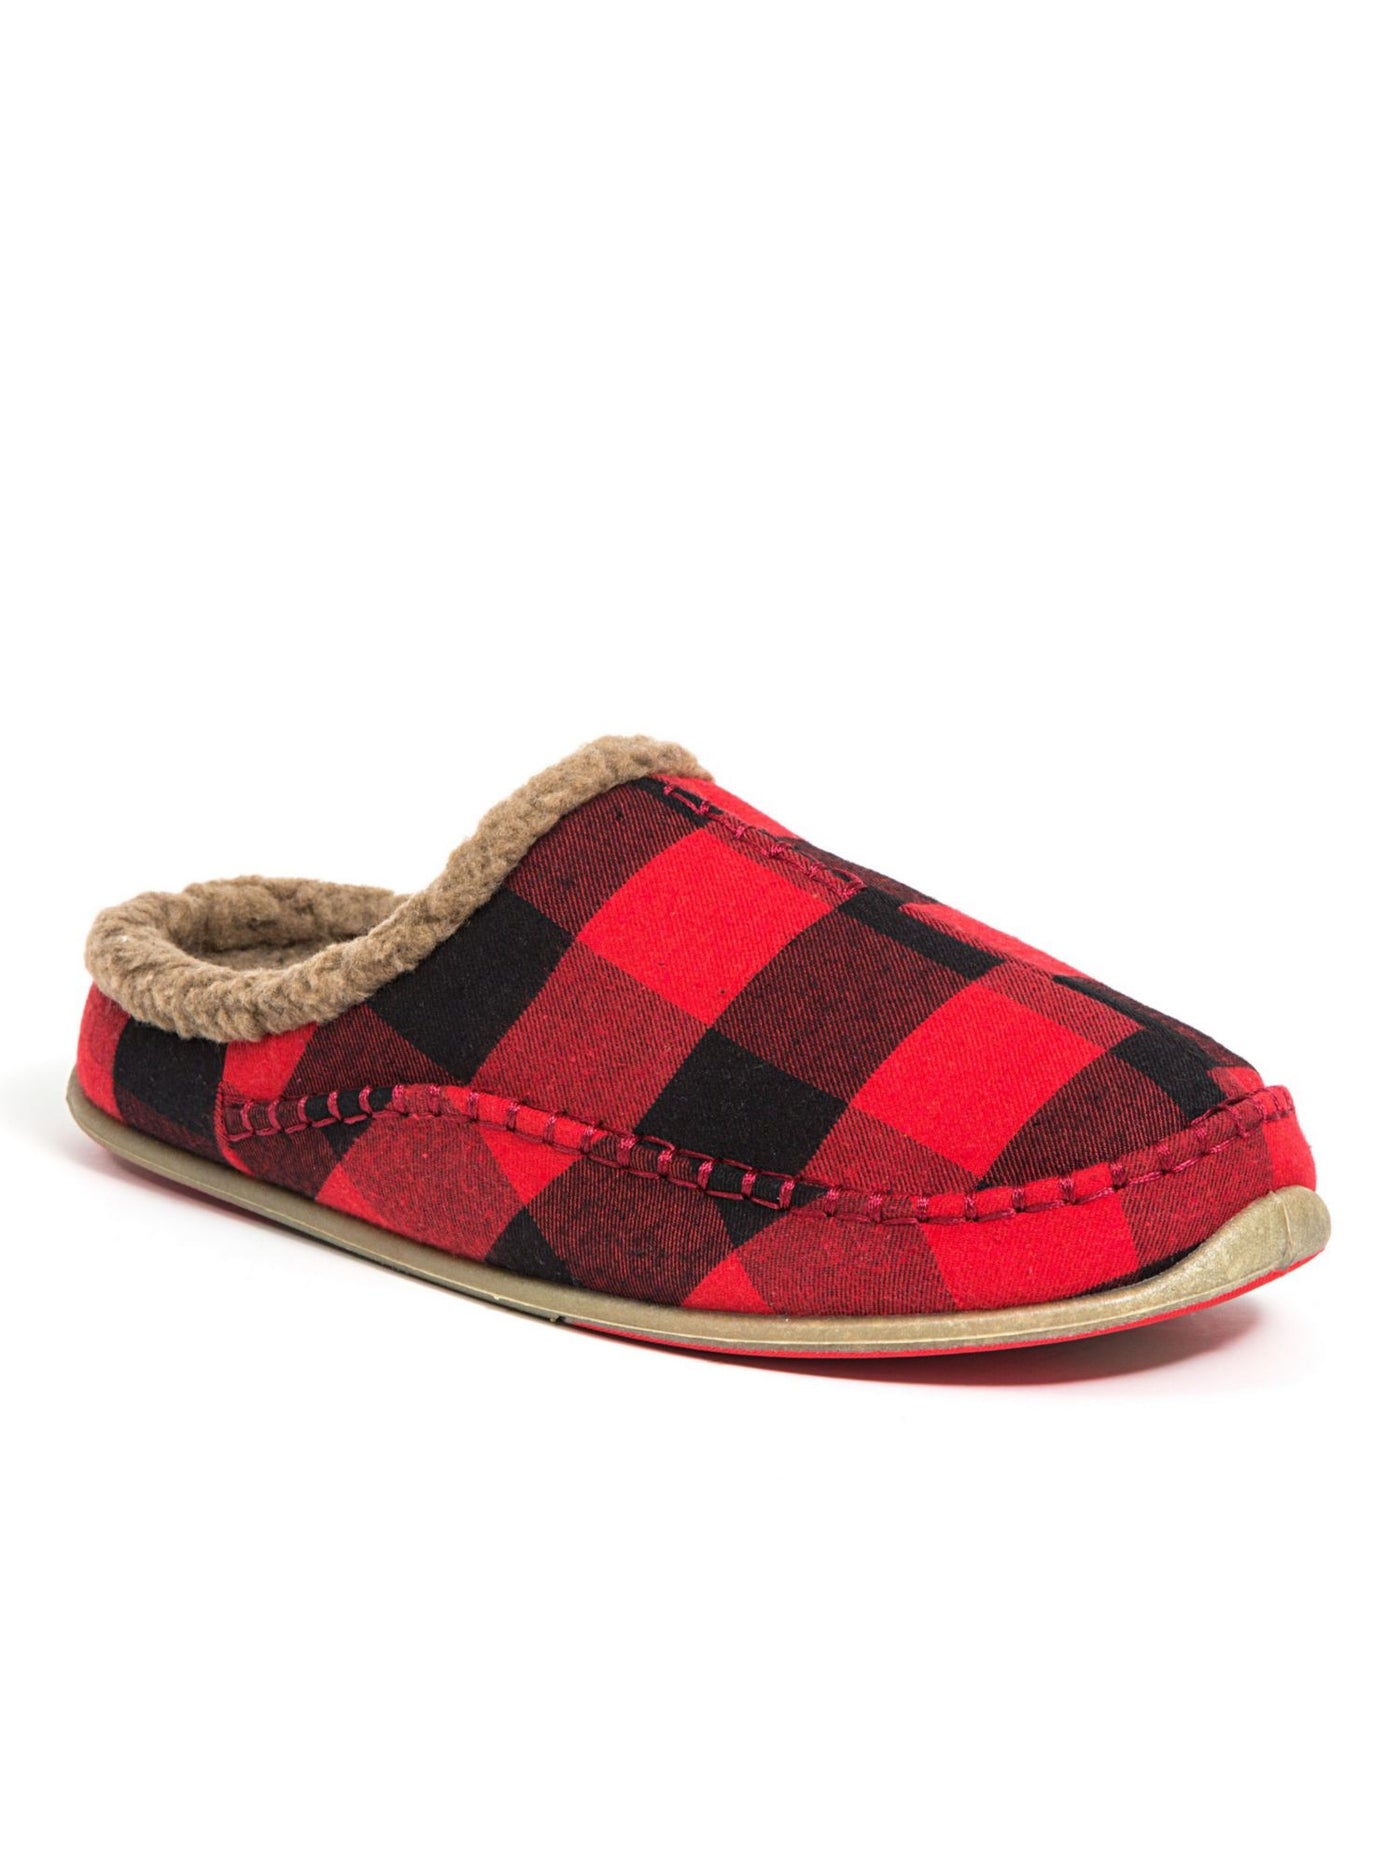 DEER STAGS SLIPPEROOZ Mens Red Plaid Comfort Nordic Round Toe Platform Slip On Slippers Shoes 13 M